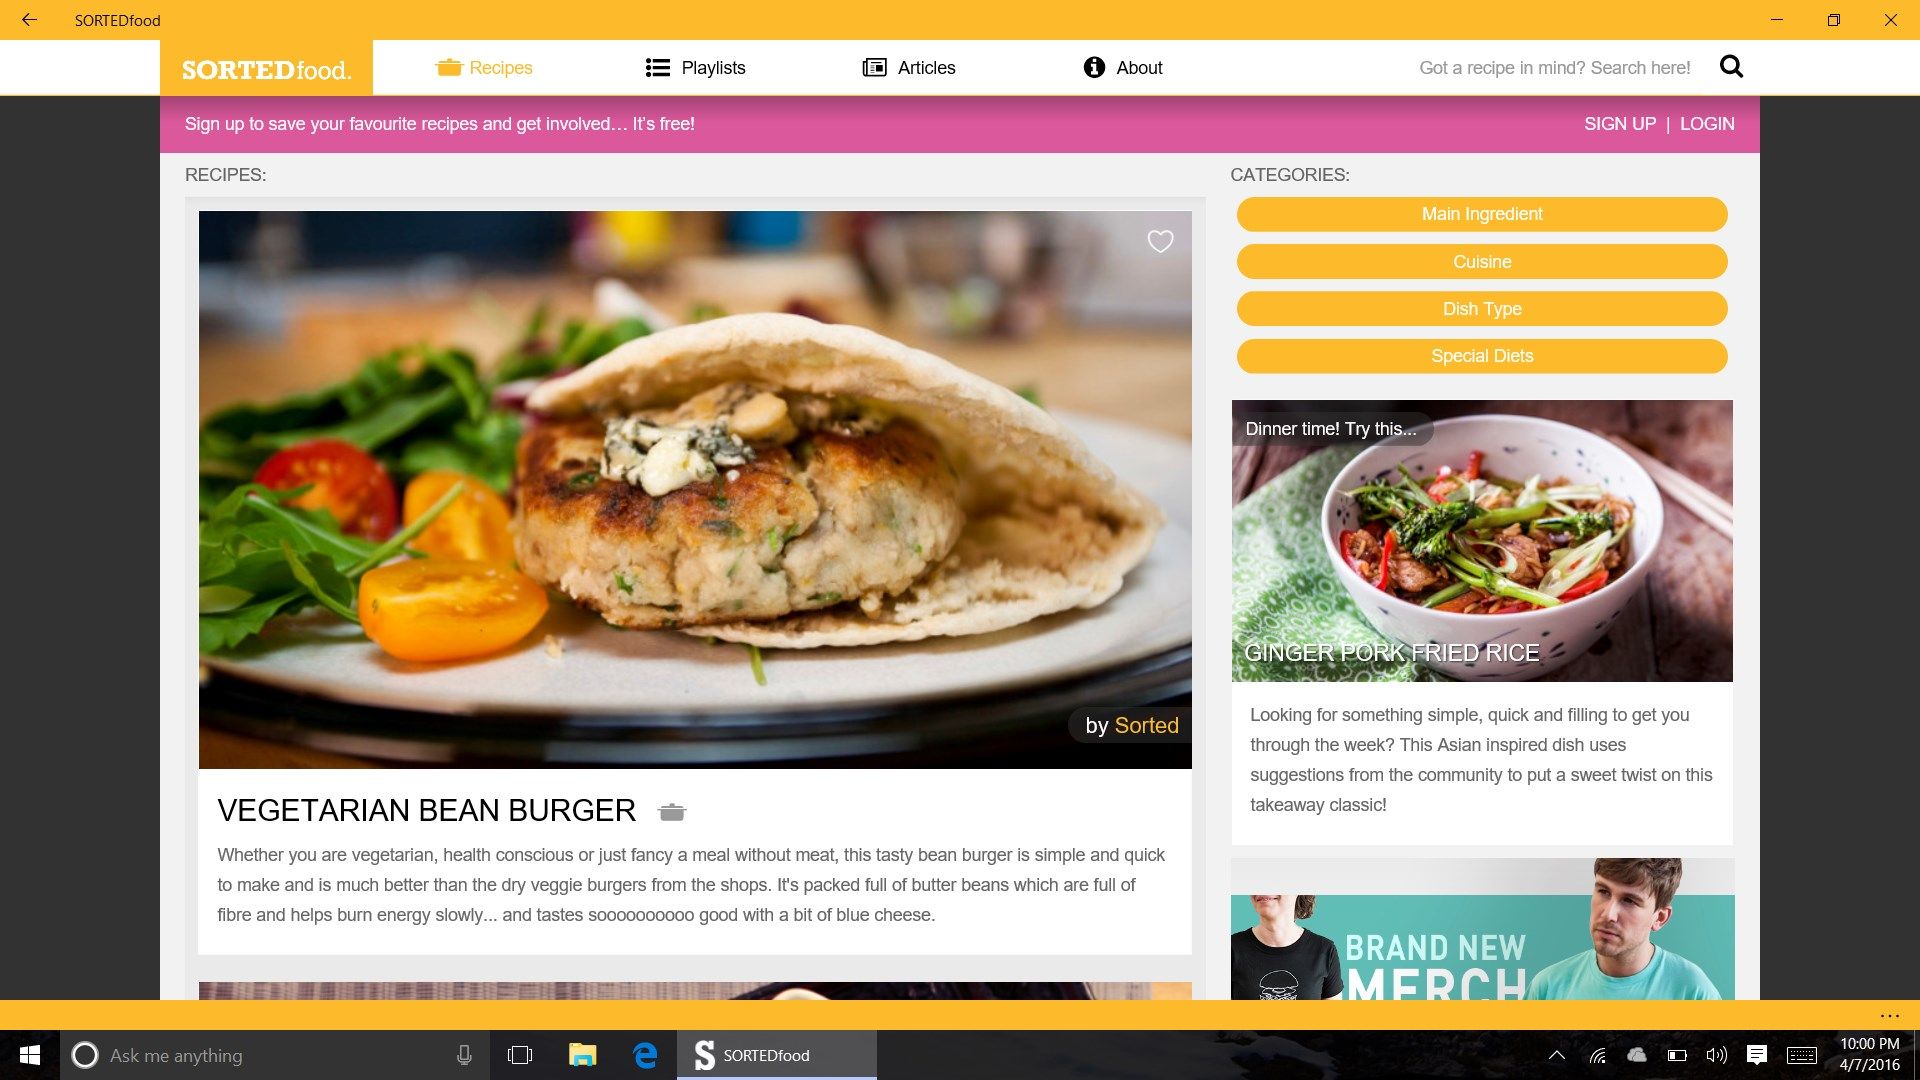 The latest recipes from the SORTED team and fans, right at your fingertips.